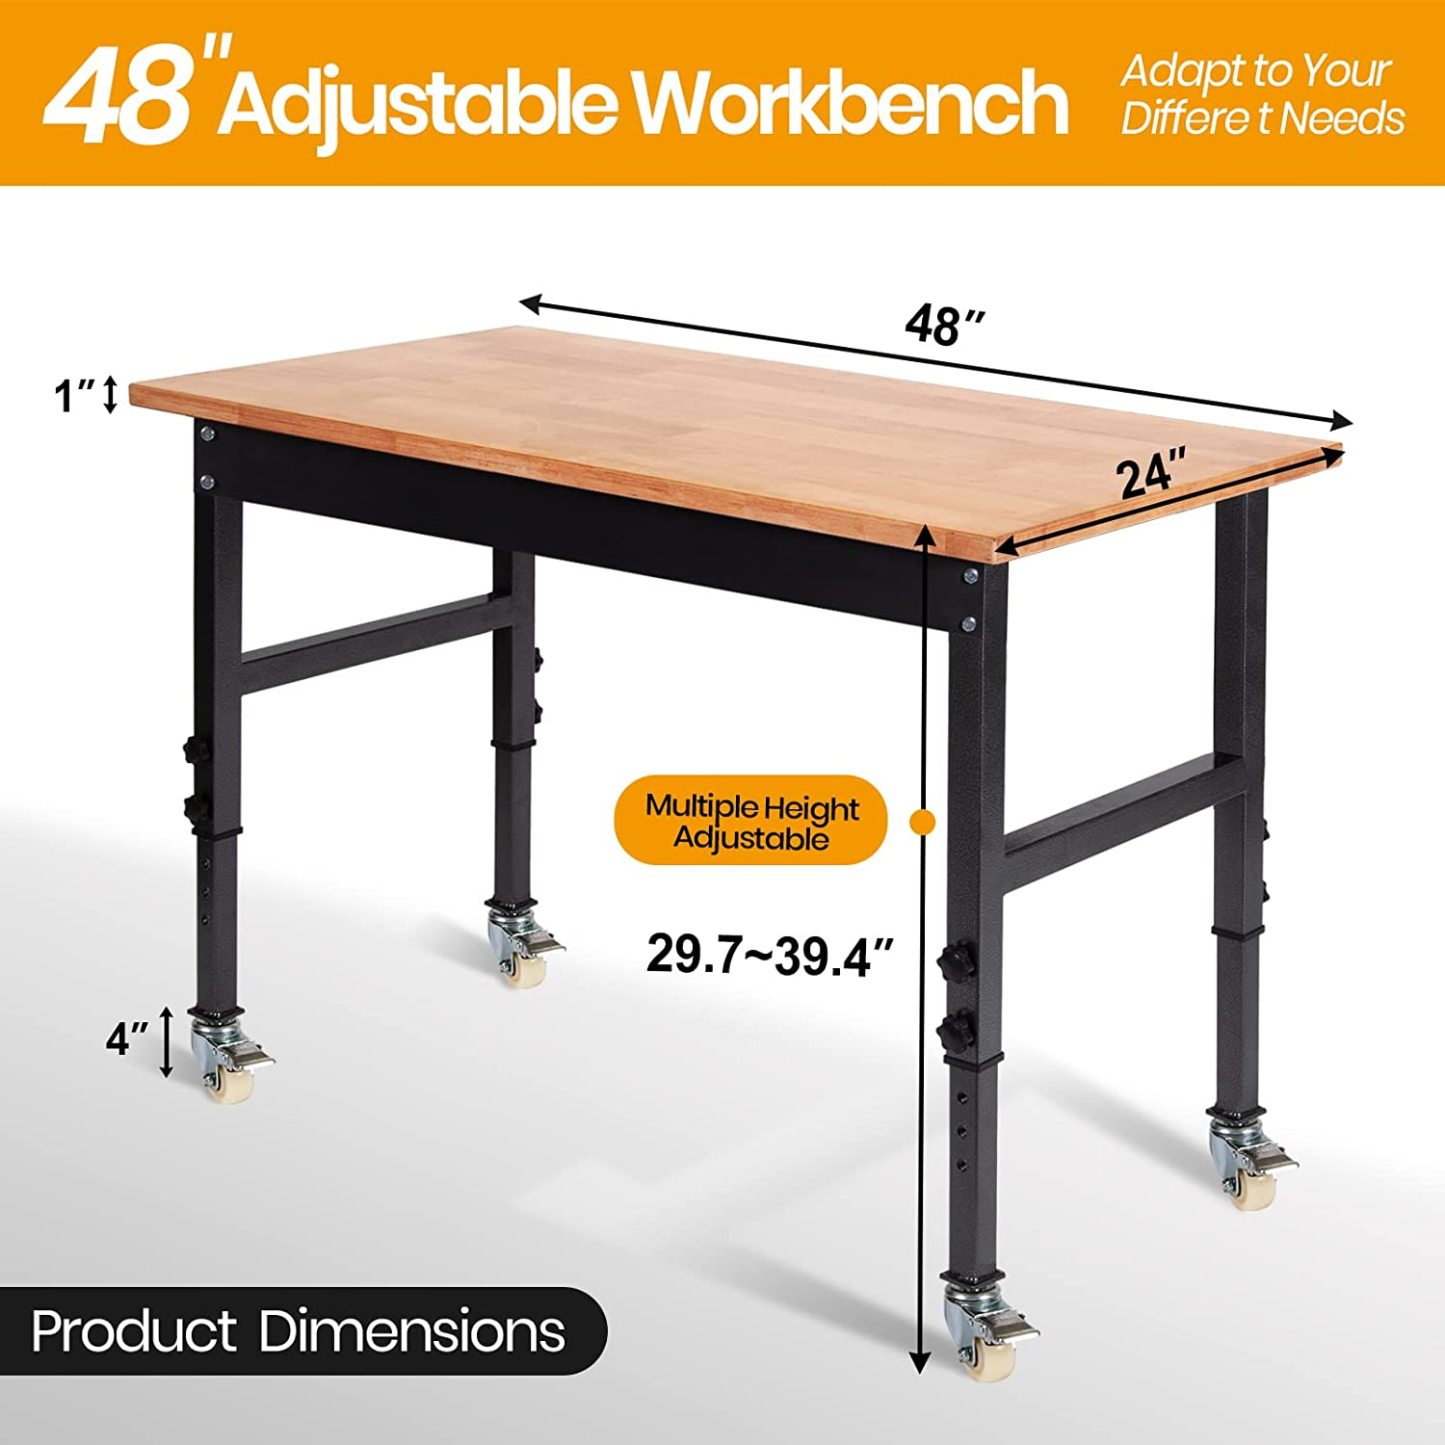 Rubberwood Top Heavy Duty Adjustable Work Bench,with wheels and socket